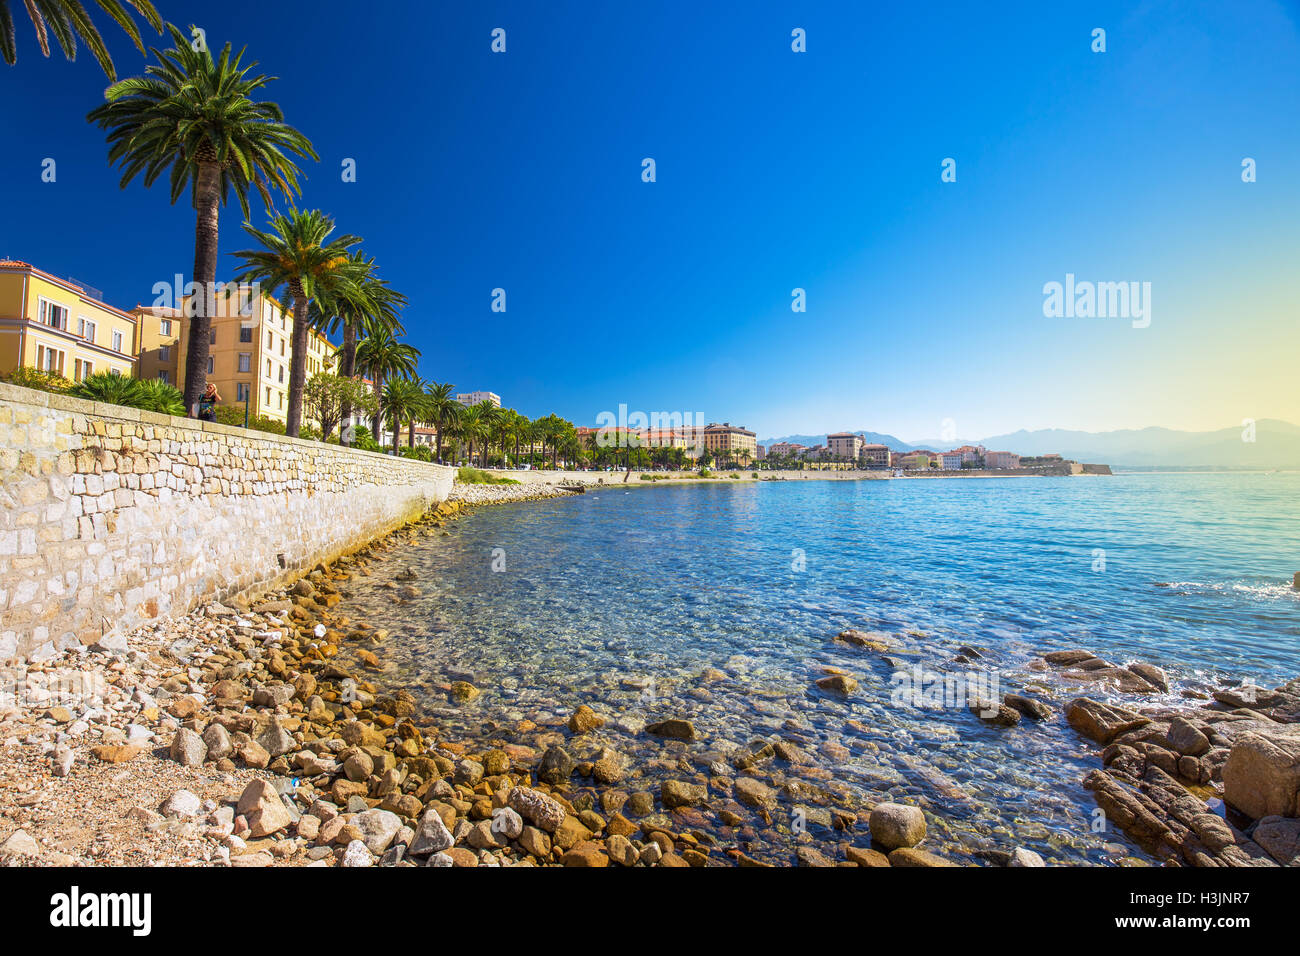 Ajaccio old city center coastal cityscape with palm trees and typical old houses, Corsica, France, Europe. Stock Photo